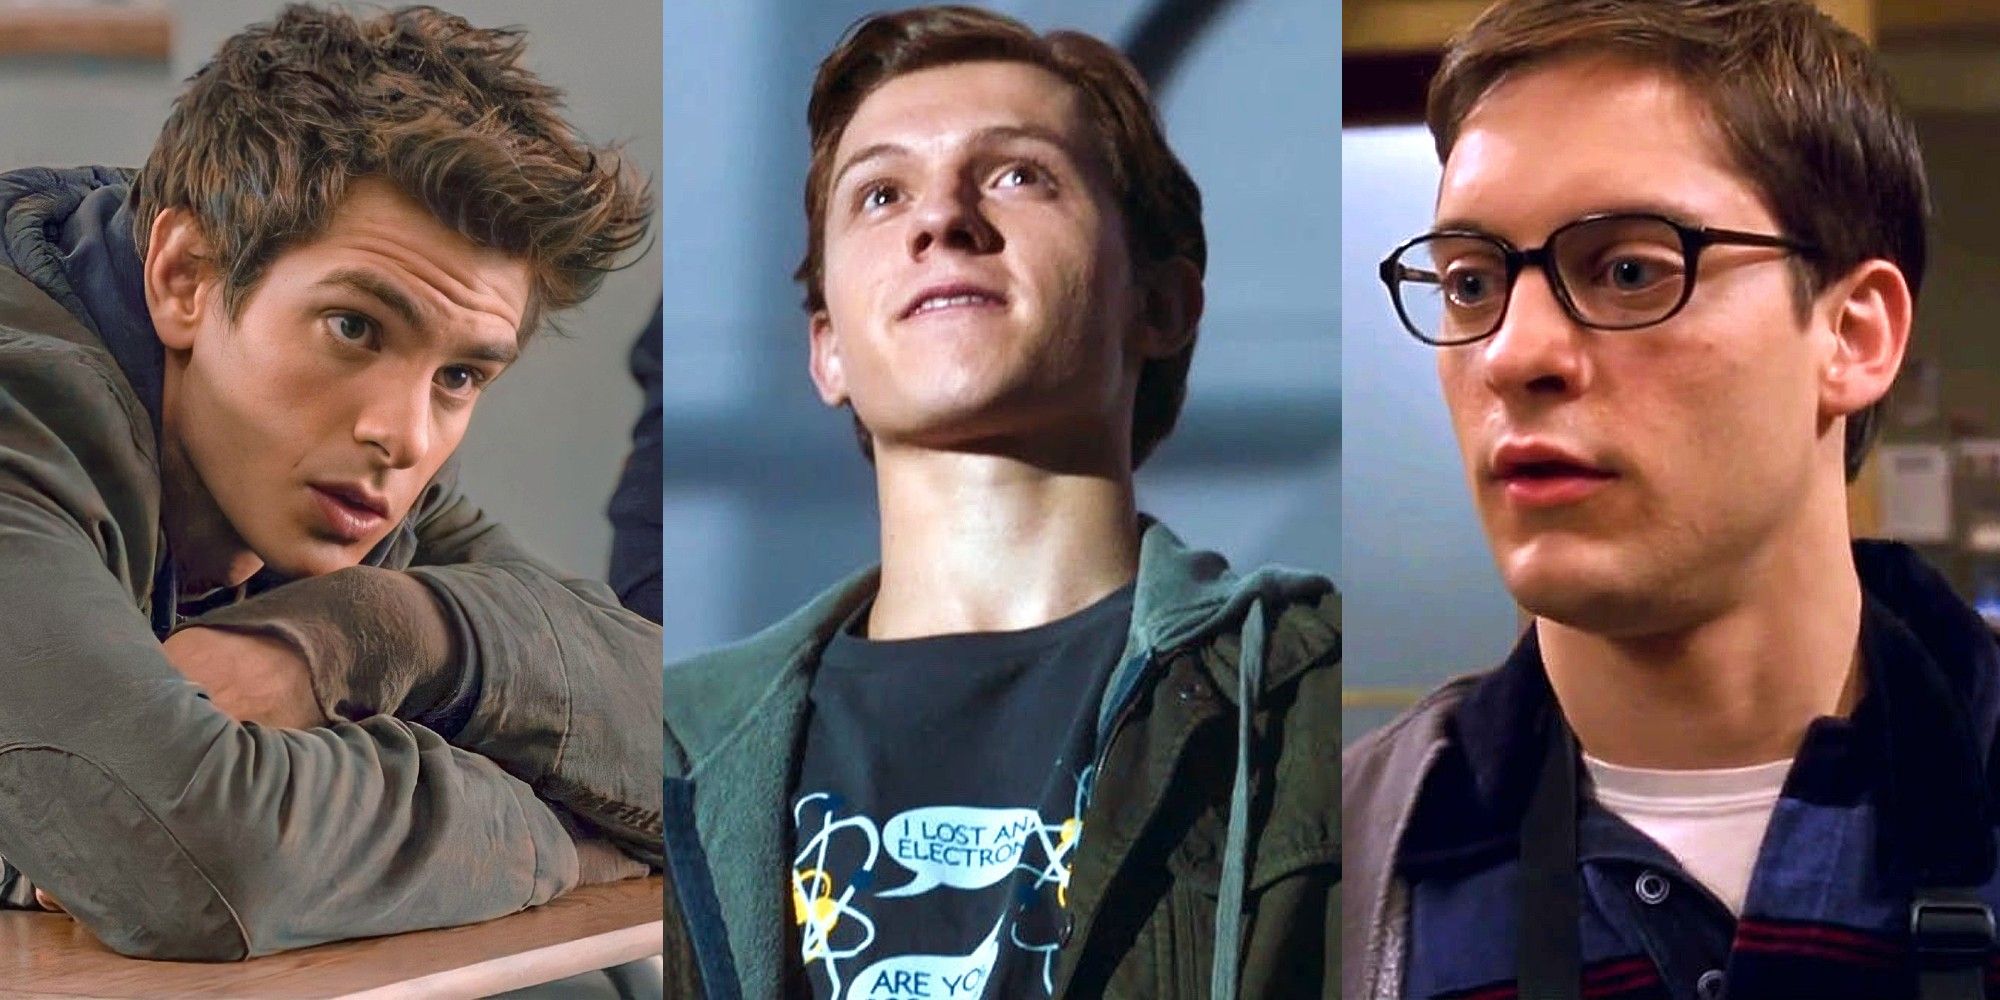 Andrew Garfield, Tom Holland and Tobey Maguire's Peter Parker in their films